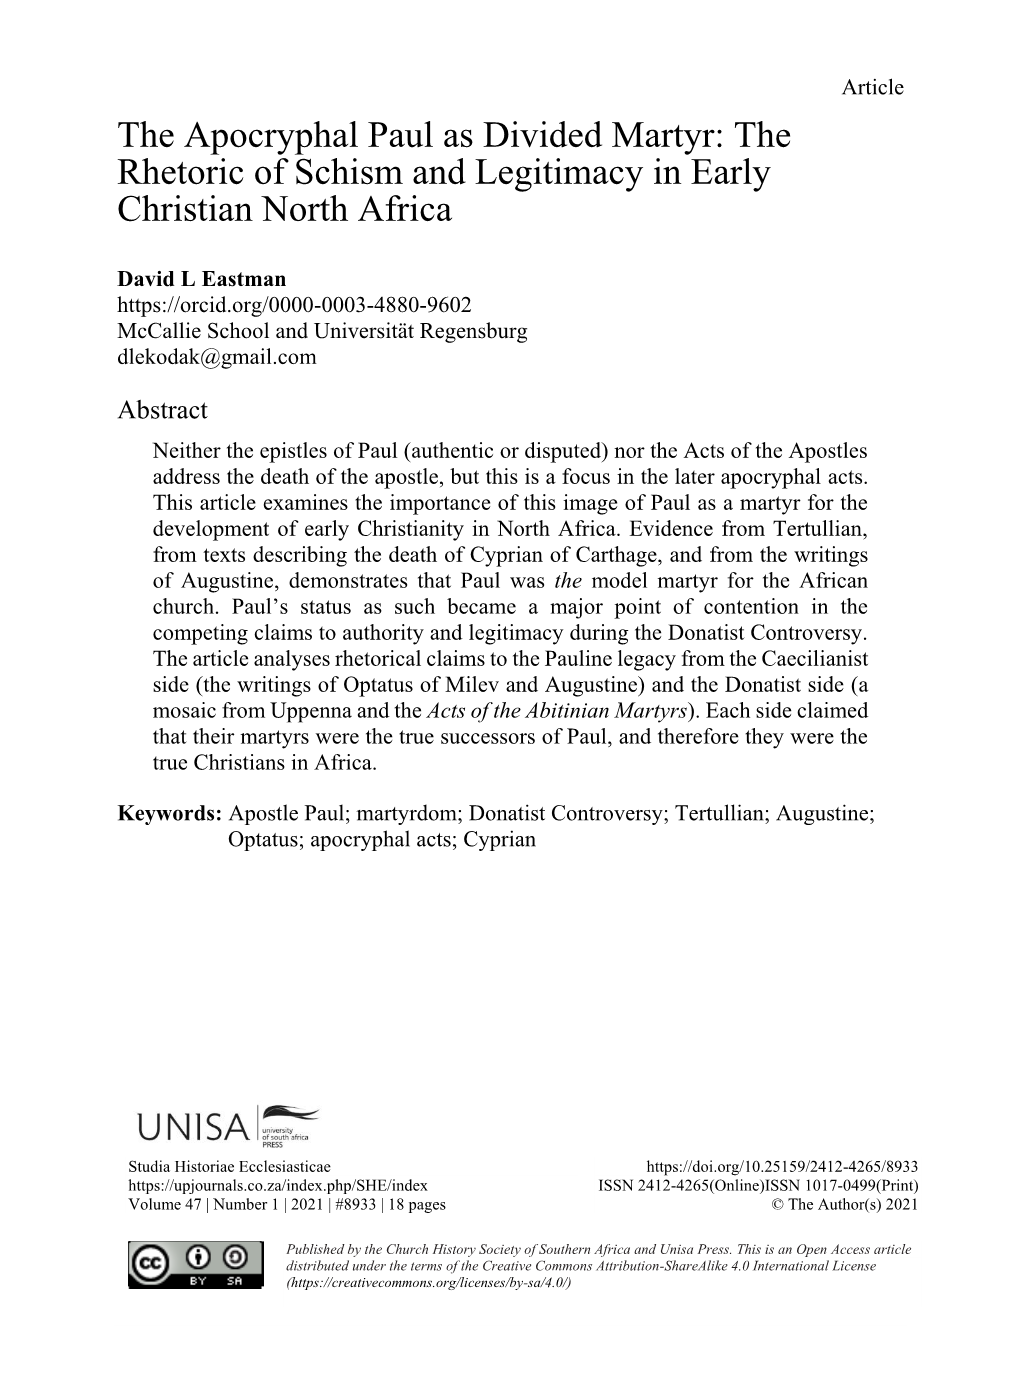 The Rhetoric of Schism and Legitimacy in Early Christian North Africa